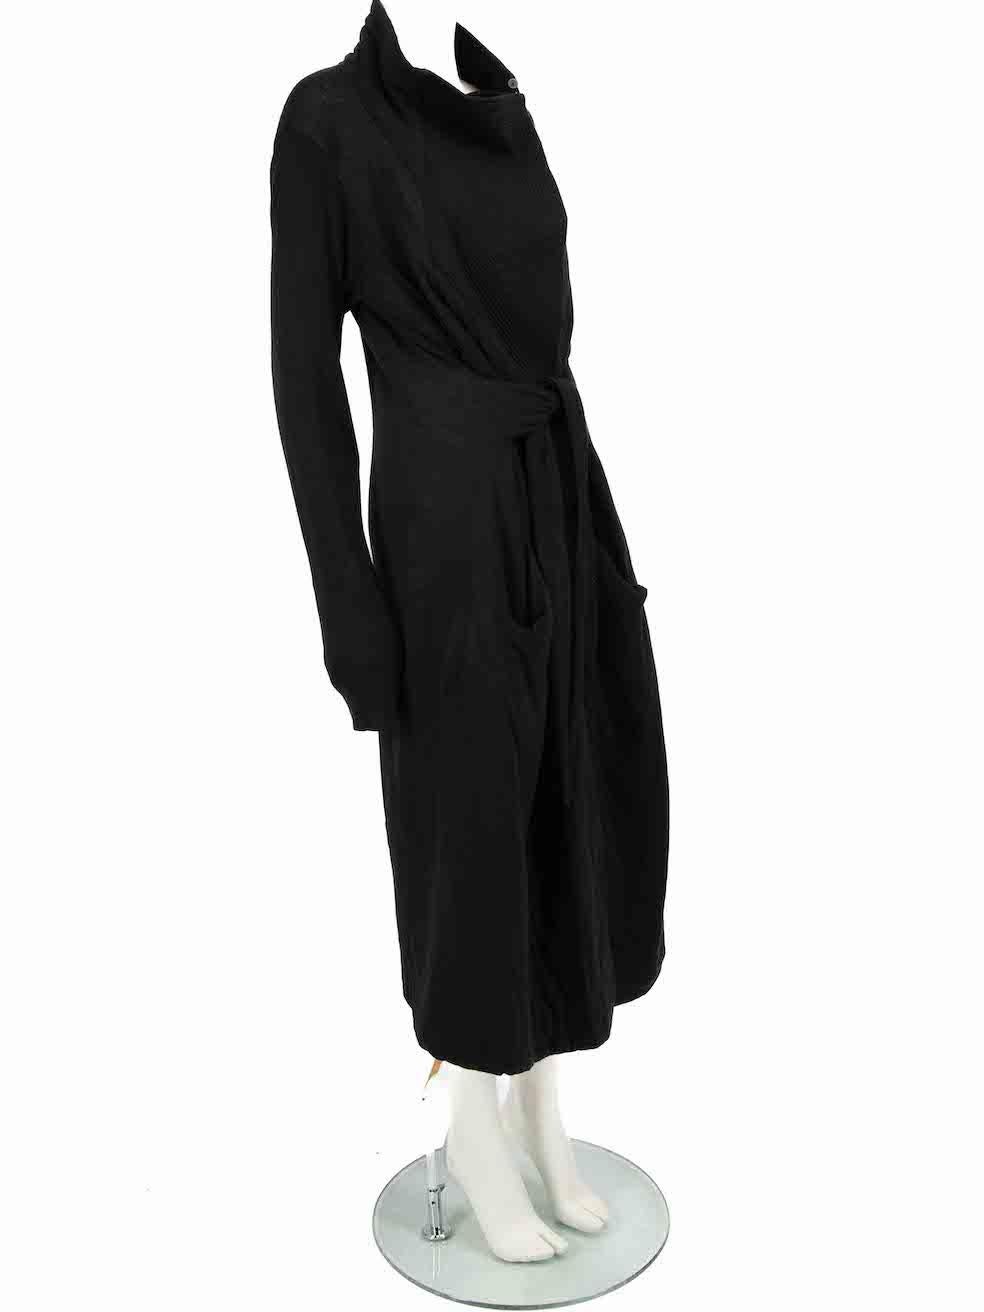 CONDITION is Very good. Minimal wear to coat is evident. Minimal wear to the right shoulder with small hole and the right sleeve cuff has slight pilling on this used Rick Owens Lillies designer resale item.
 
Details
Black
Wool
Long coat
Tie belted